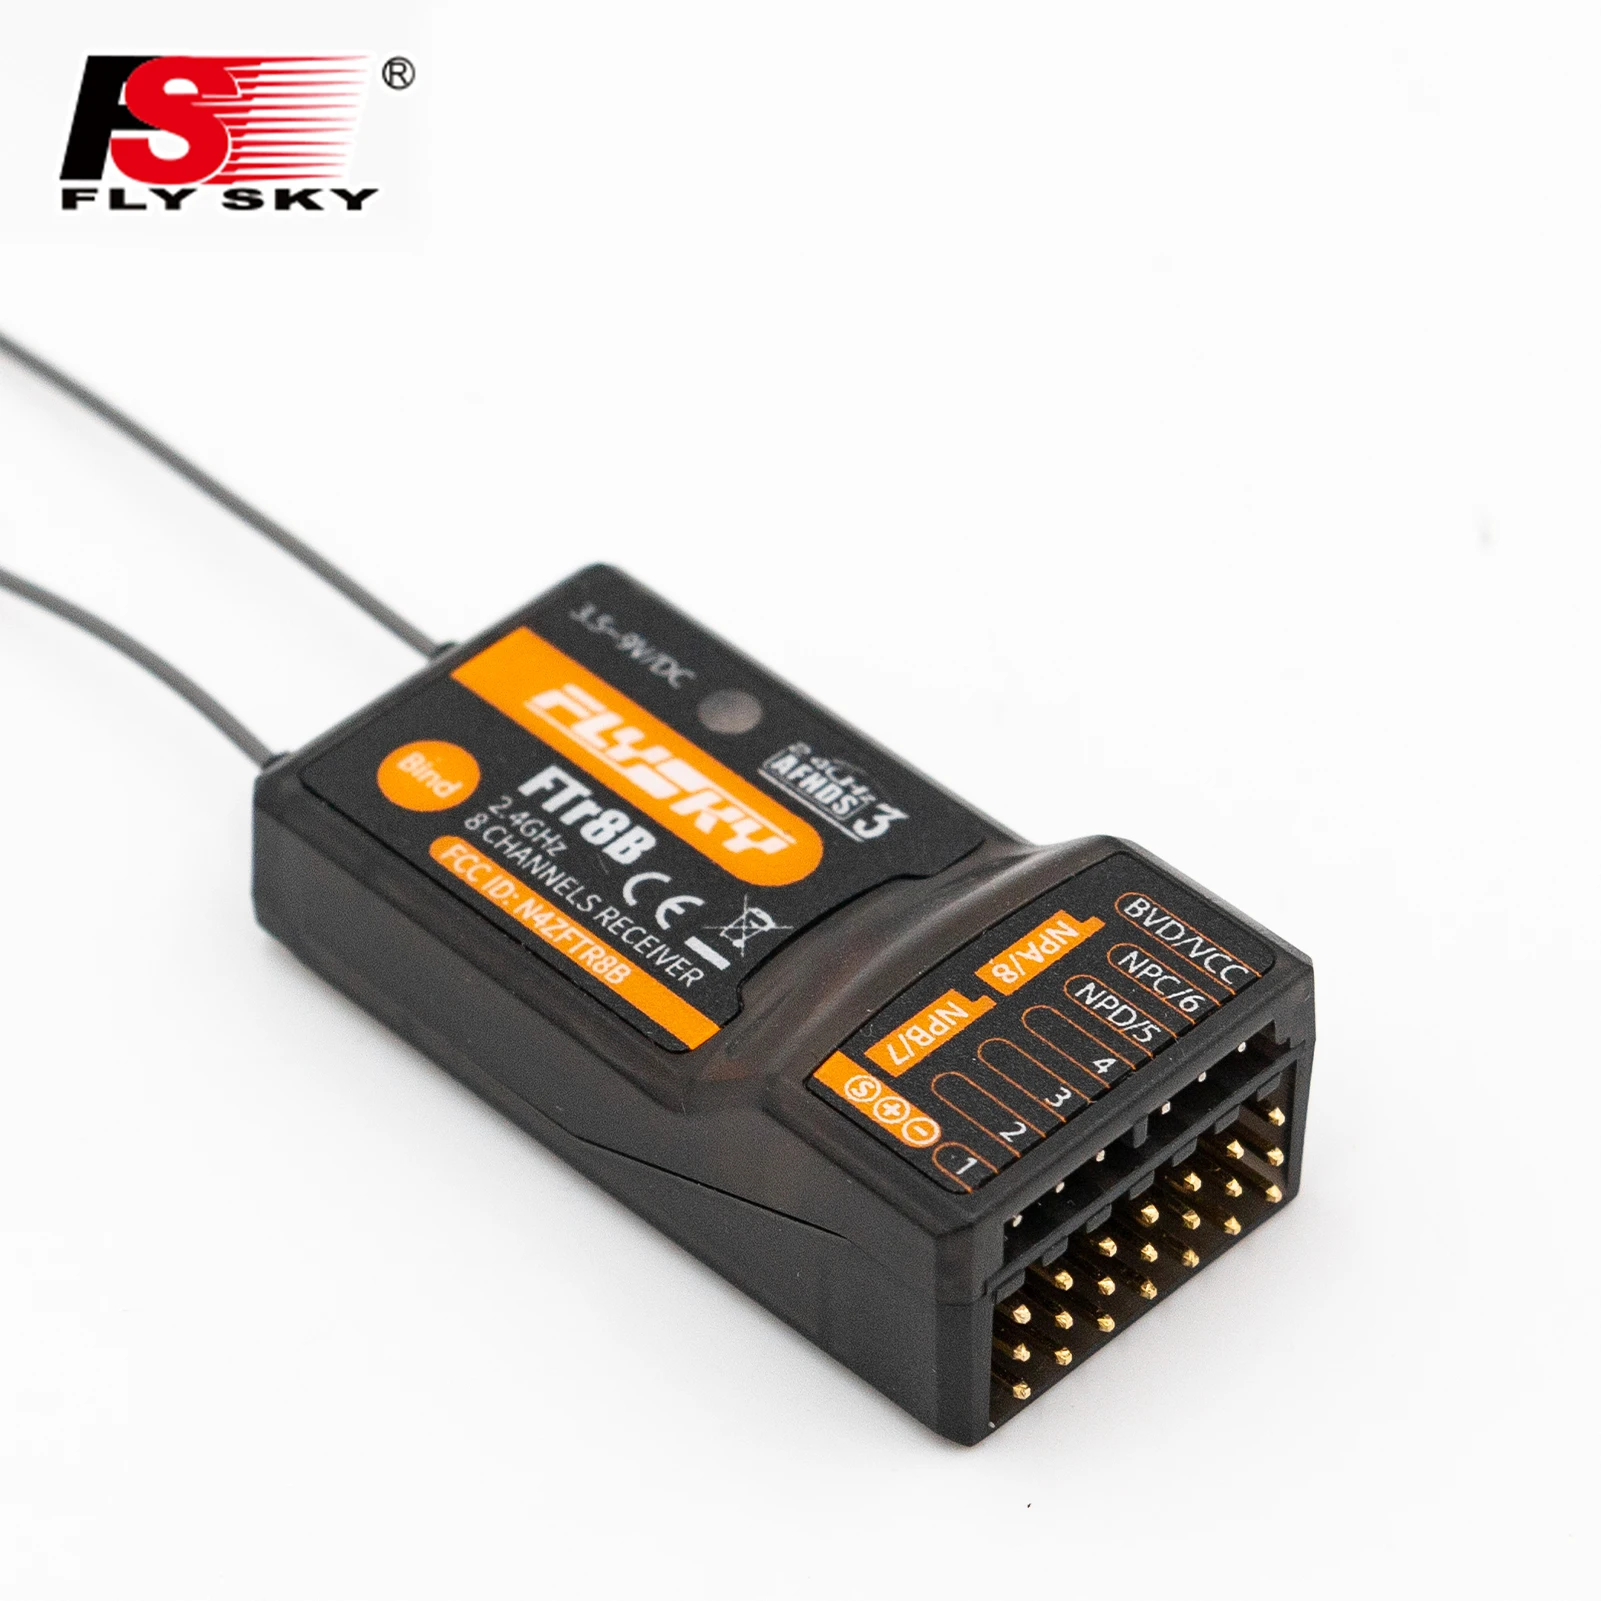 FlySky FTr8B 2.4GHz 8CH Receiver for RC Airplane Helicopter Fixed Wing Glider - £46.09 GBP